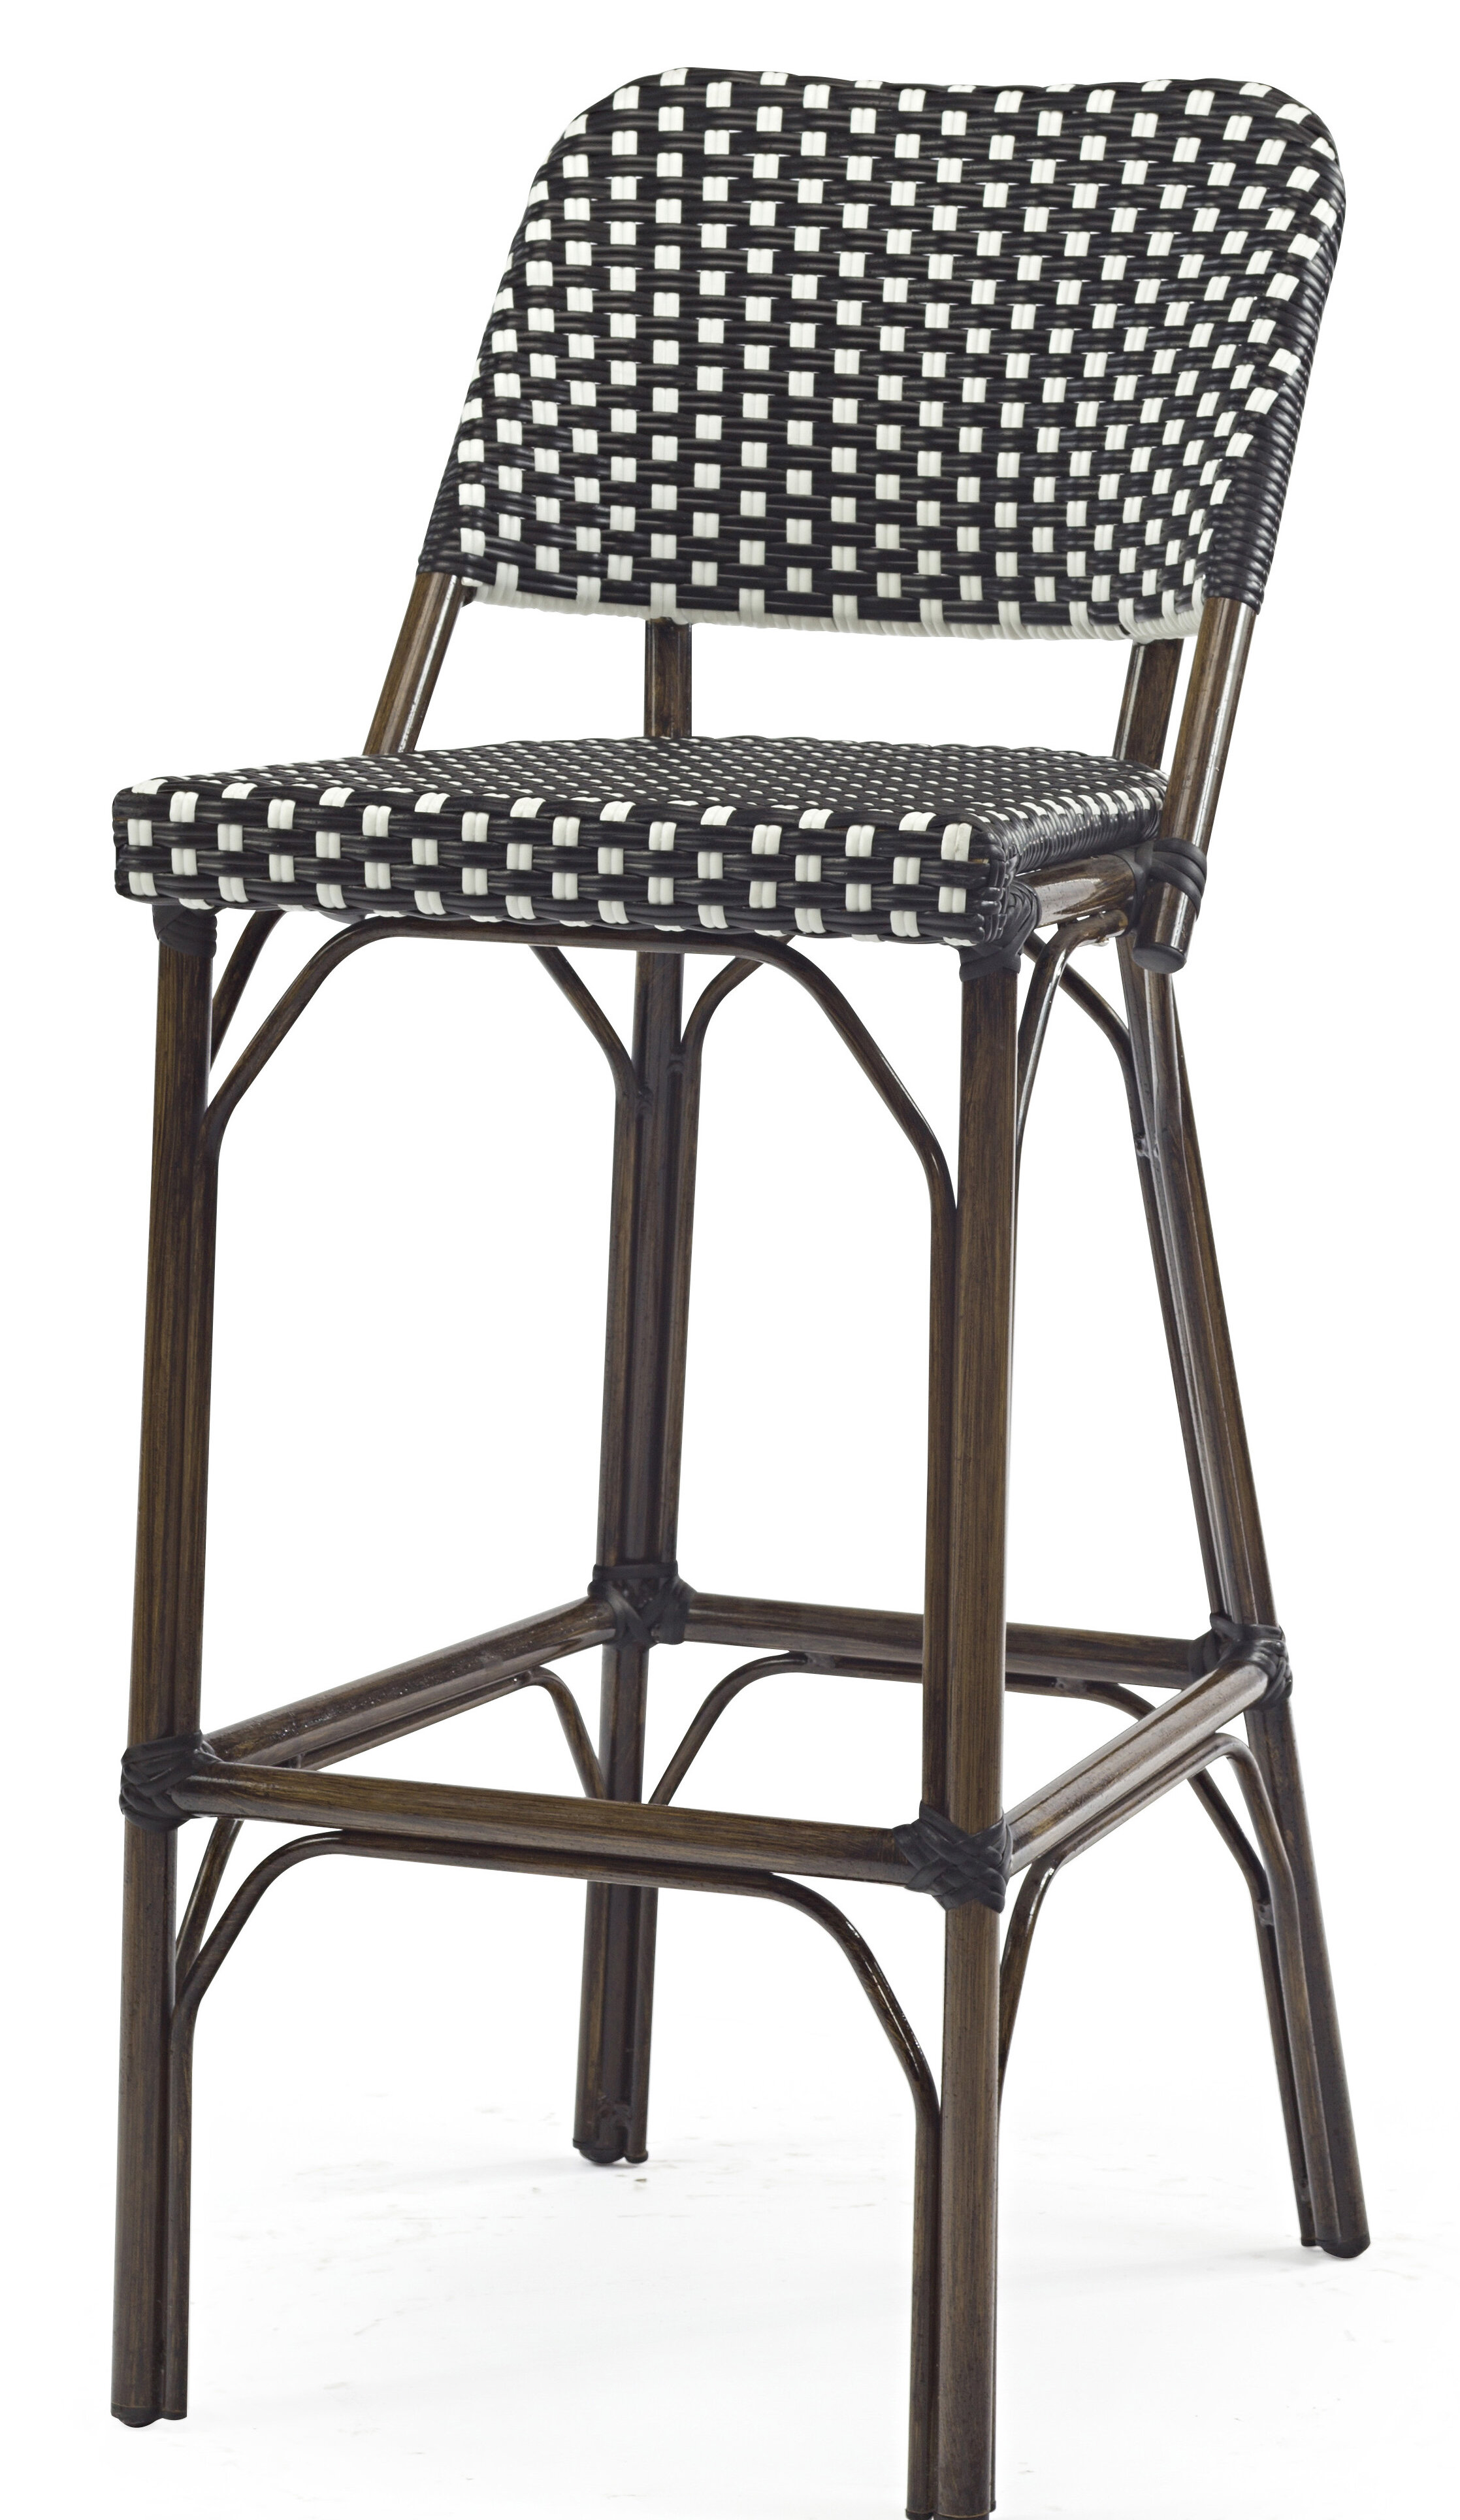 Bar Stools For Outside - Stools Item